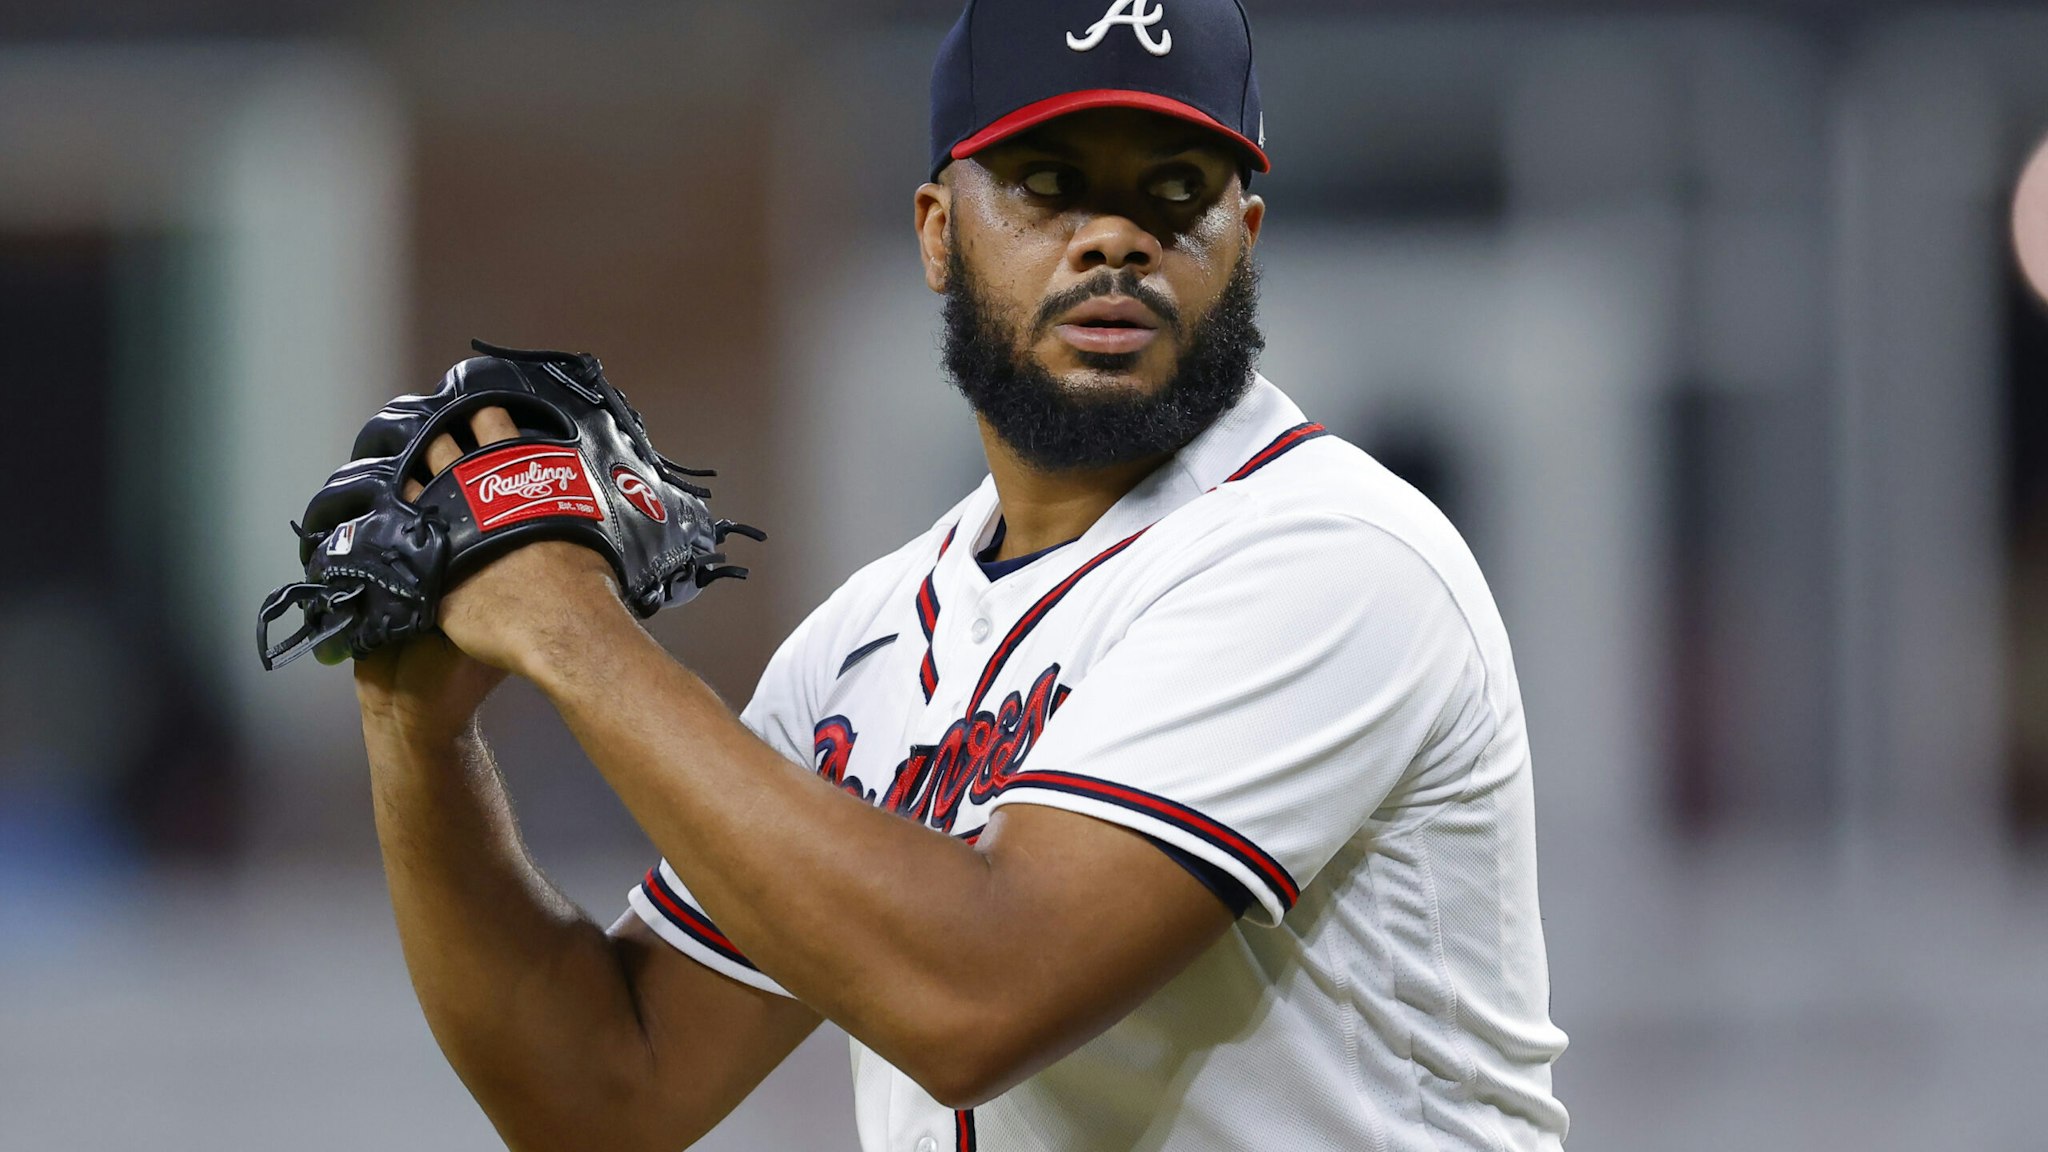 Braves closer Kenley Janson has been sidelined with an irregular heartbeat, and he has battled heart issues for years